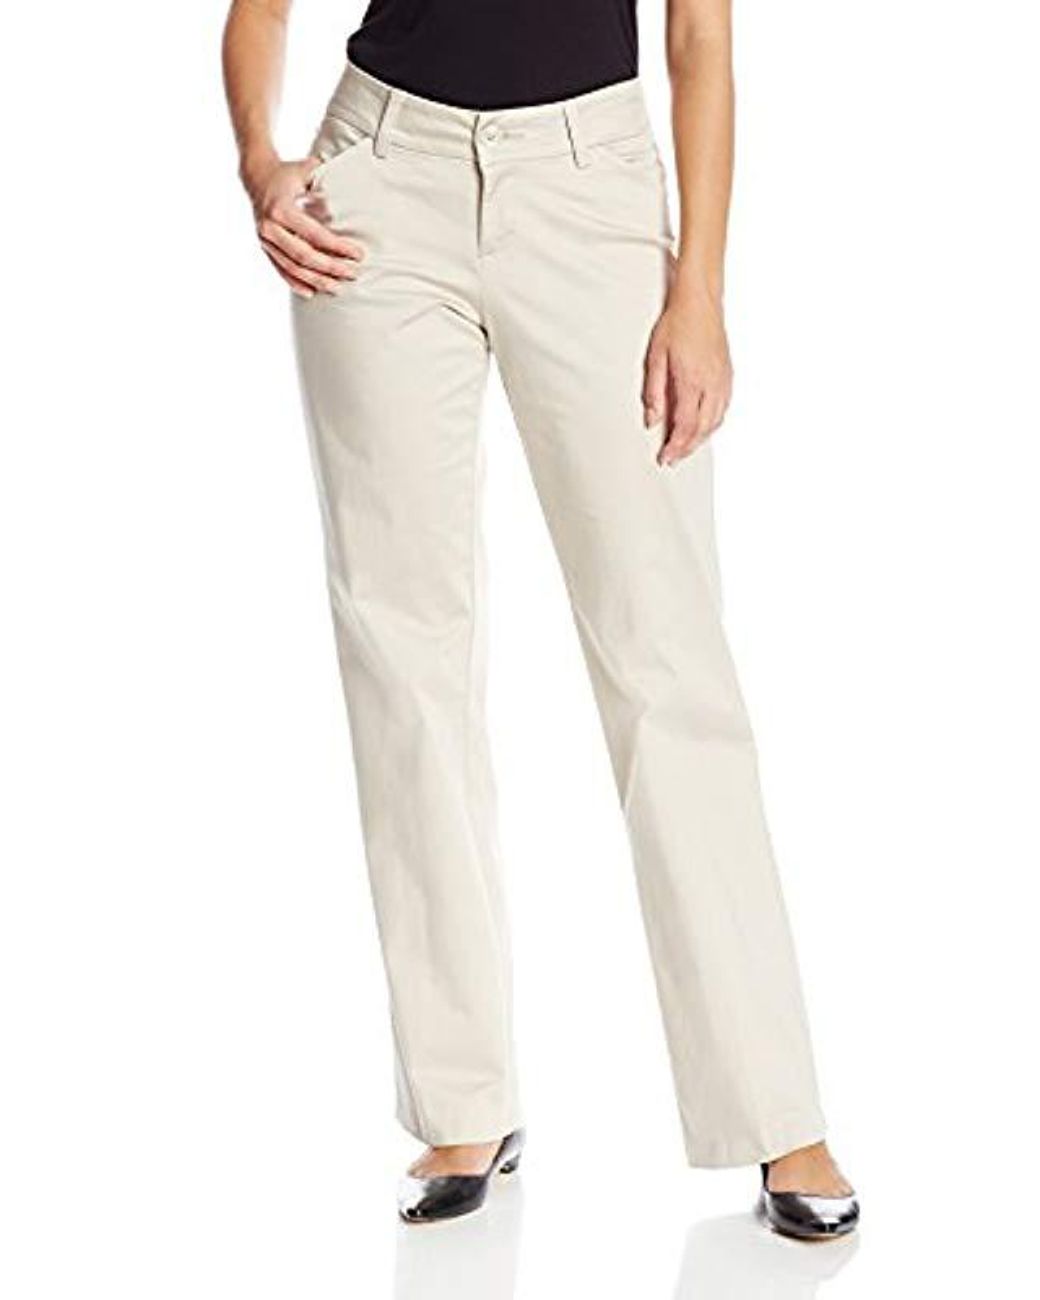 LEE Womens Petite Modern Series Midrise Fit Linea Ankle Pant